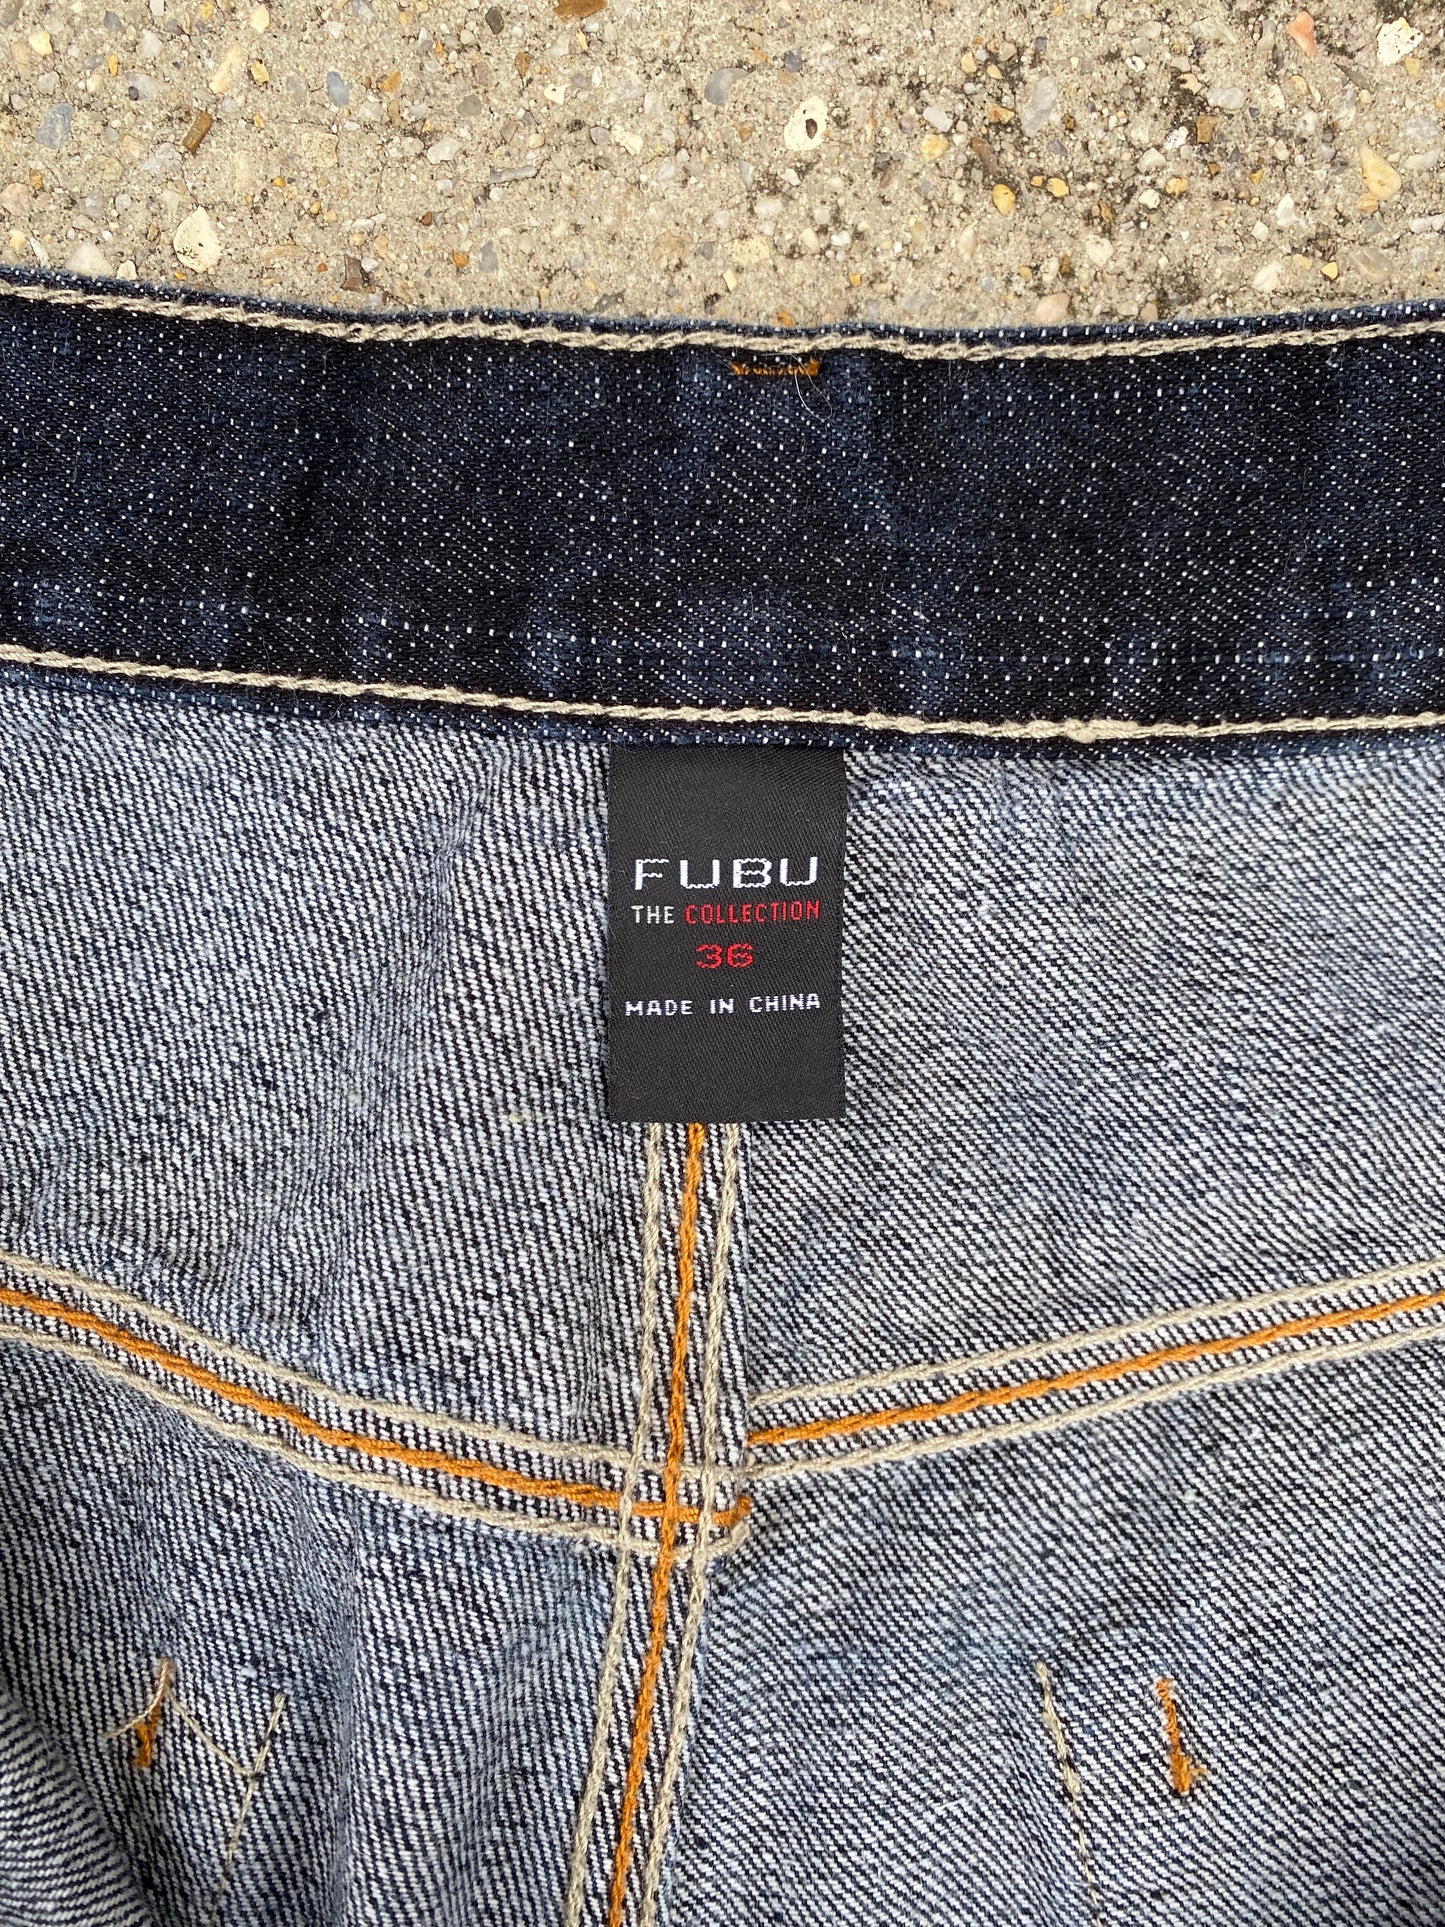 FUBU the Collection Jorts - Brimm Archive Wardrobe Research